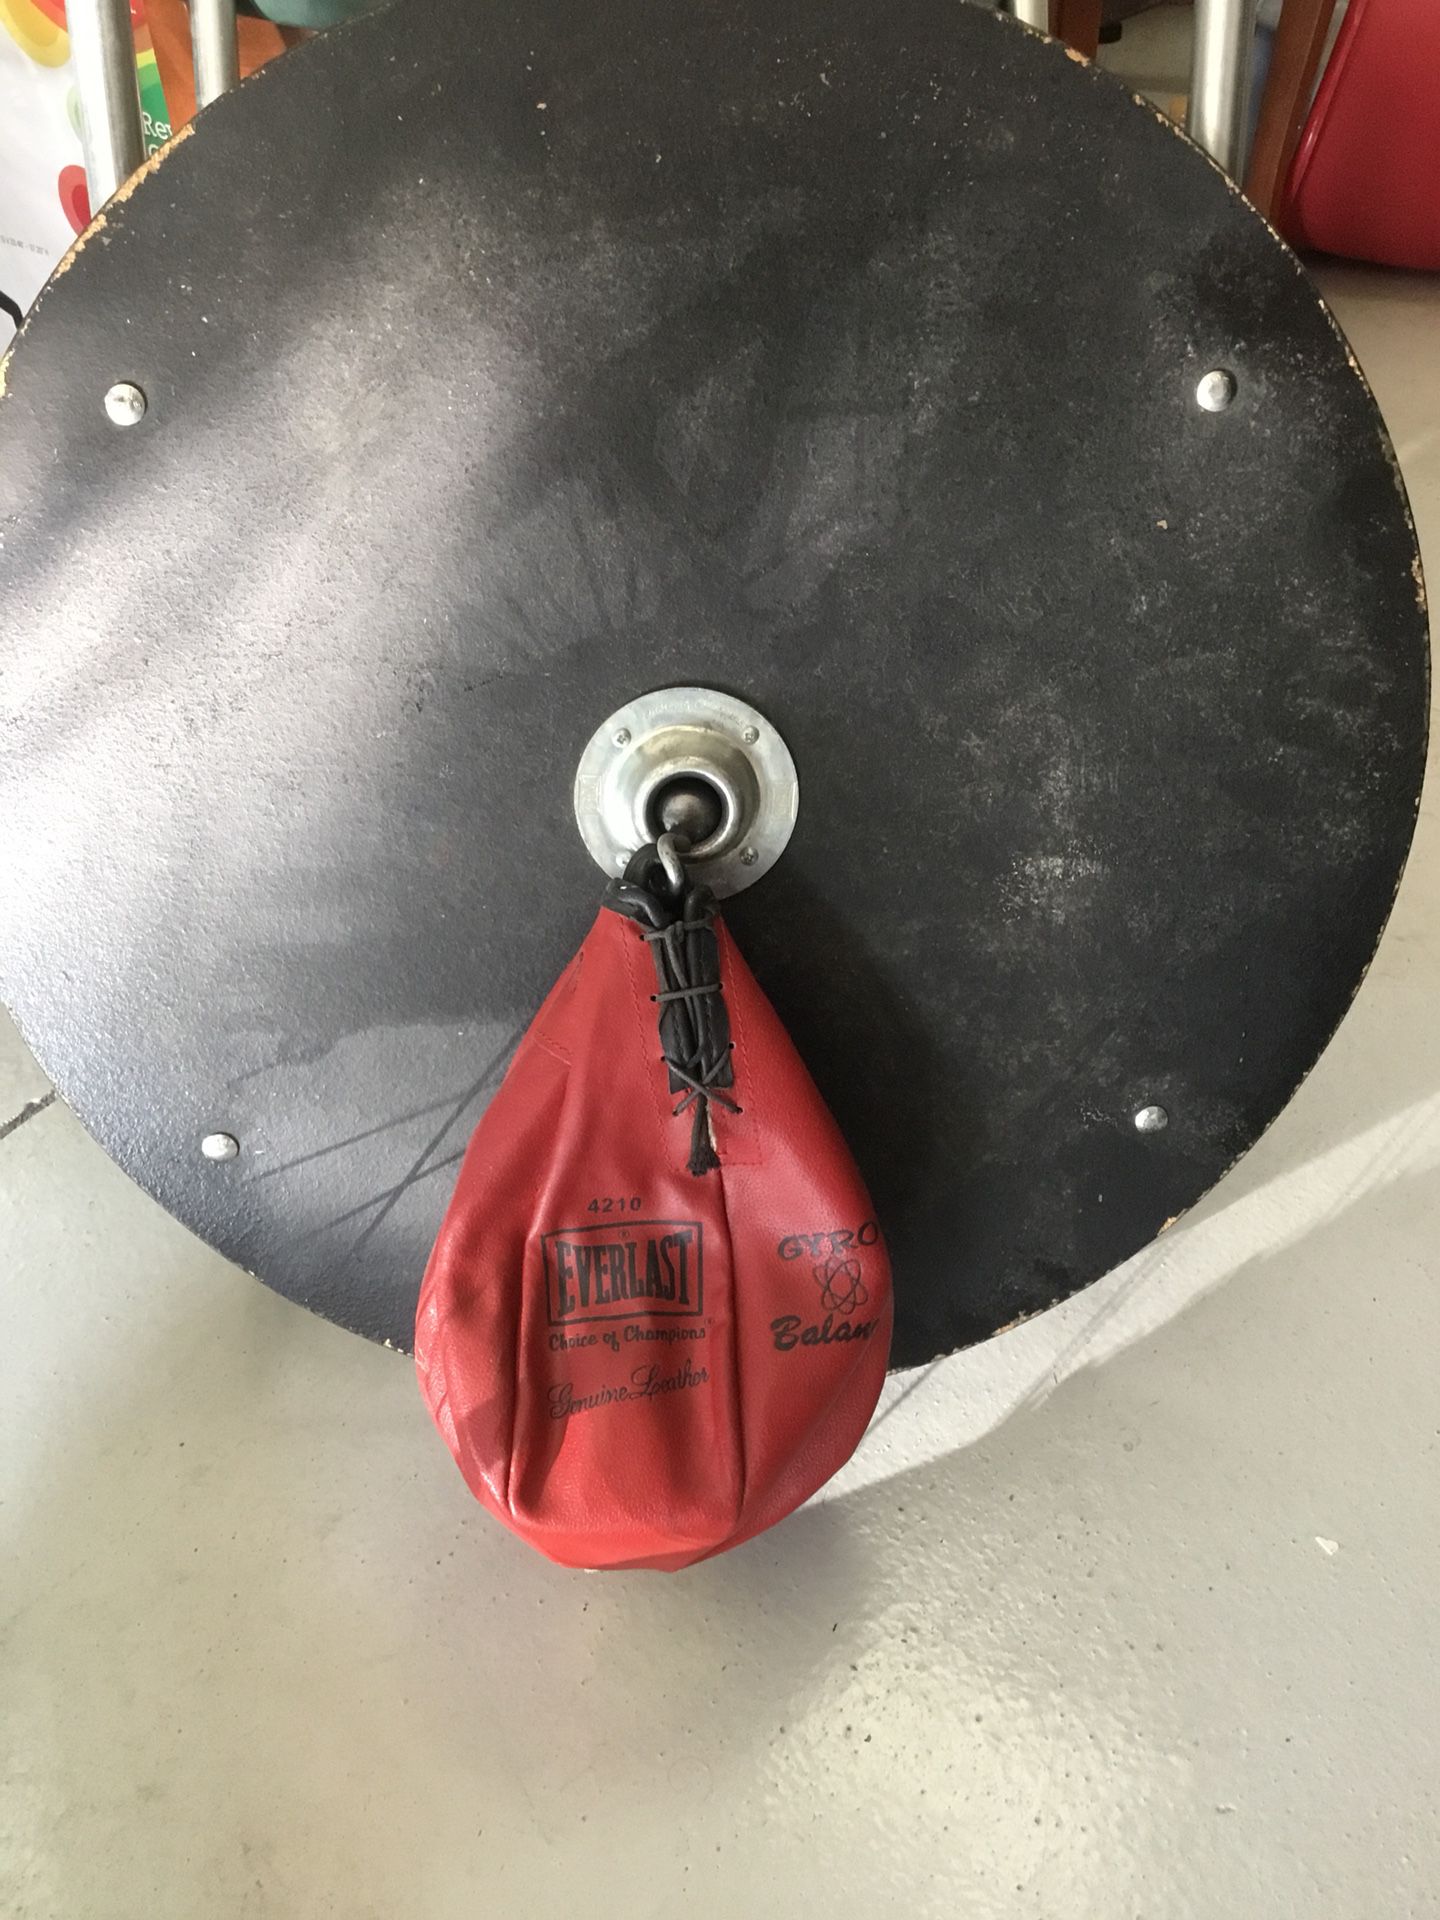 Speed bag and wall mount.